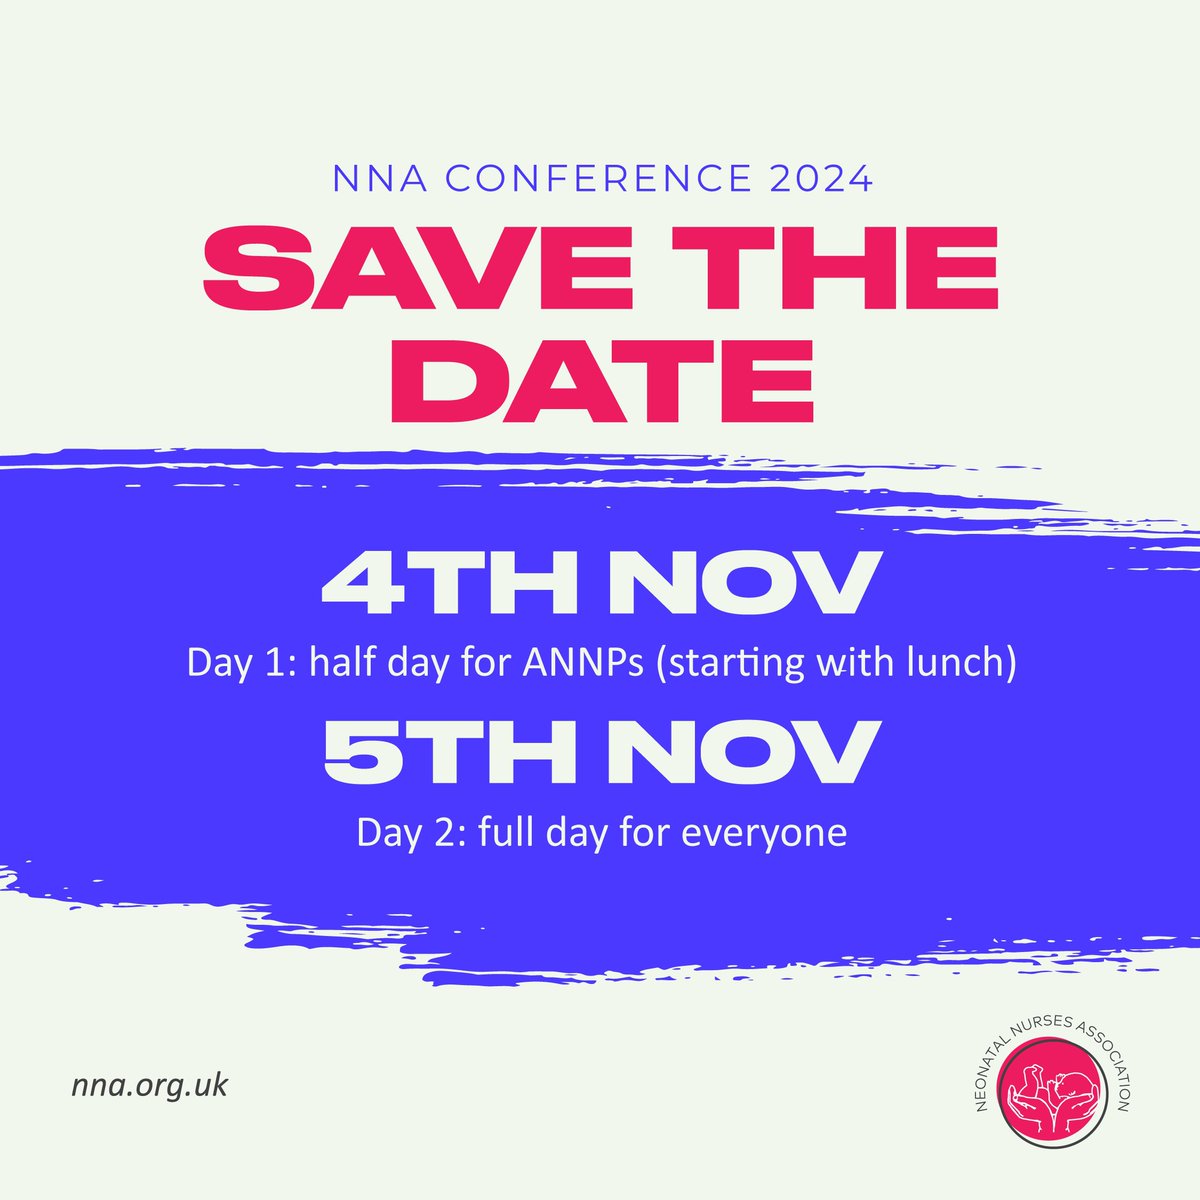 ✨ Save the date for the NNA Conference 2024! ✨ This year's face-to-face NNA Conference will be held on 5th November 2024. We will also be hosting a half-day ANNP conference on 4th November. Become a member to book early! buff.ly/3IZke9a #WeAreNeonatalNurses